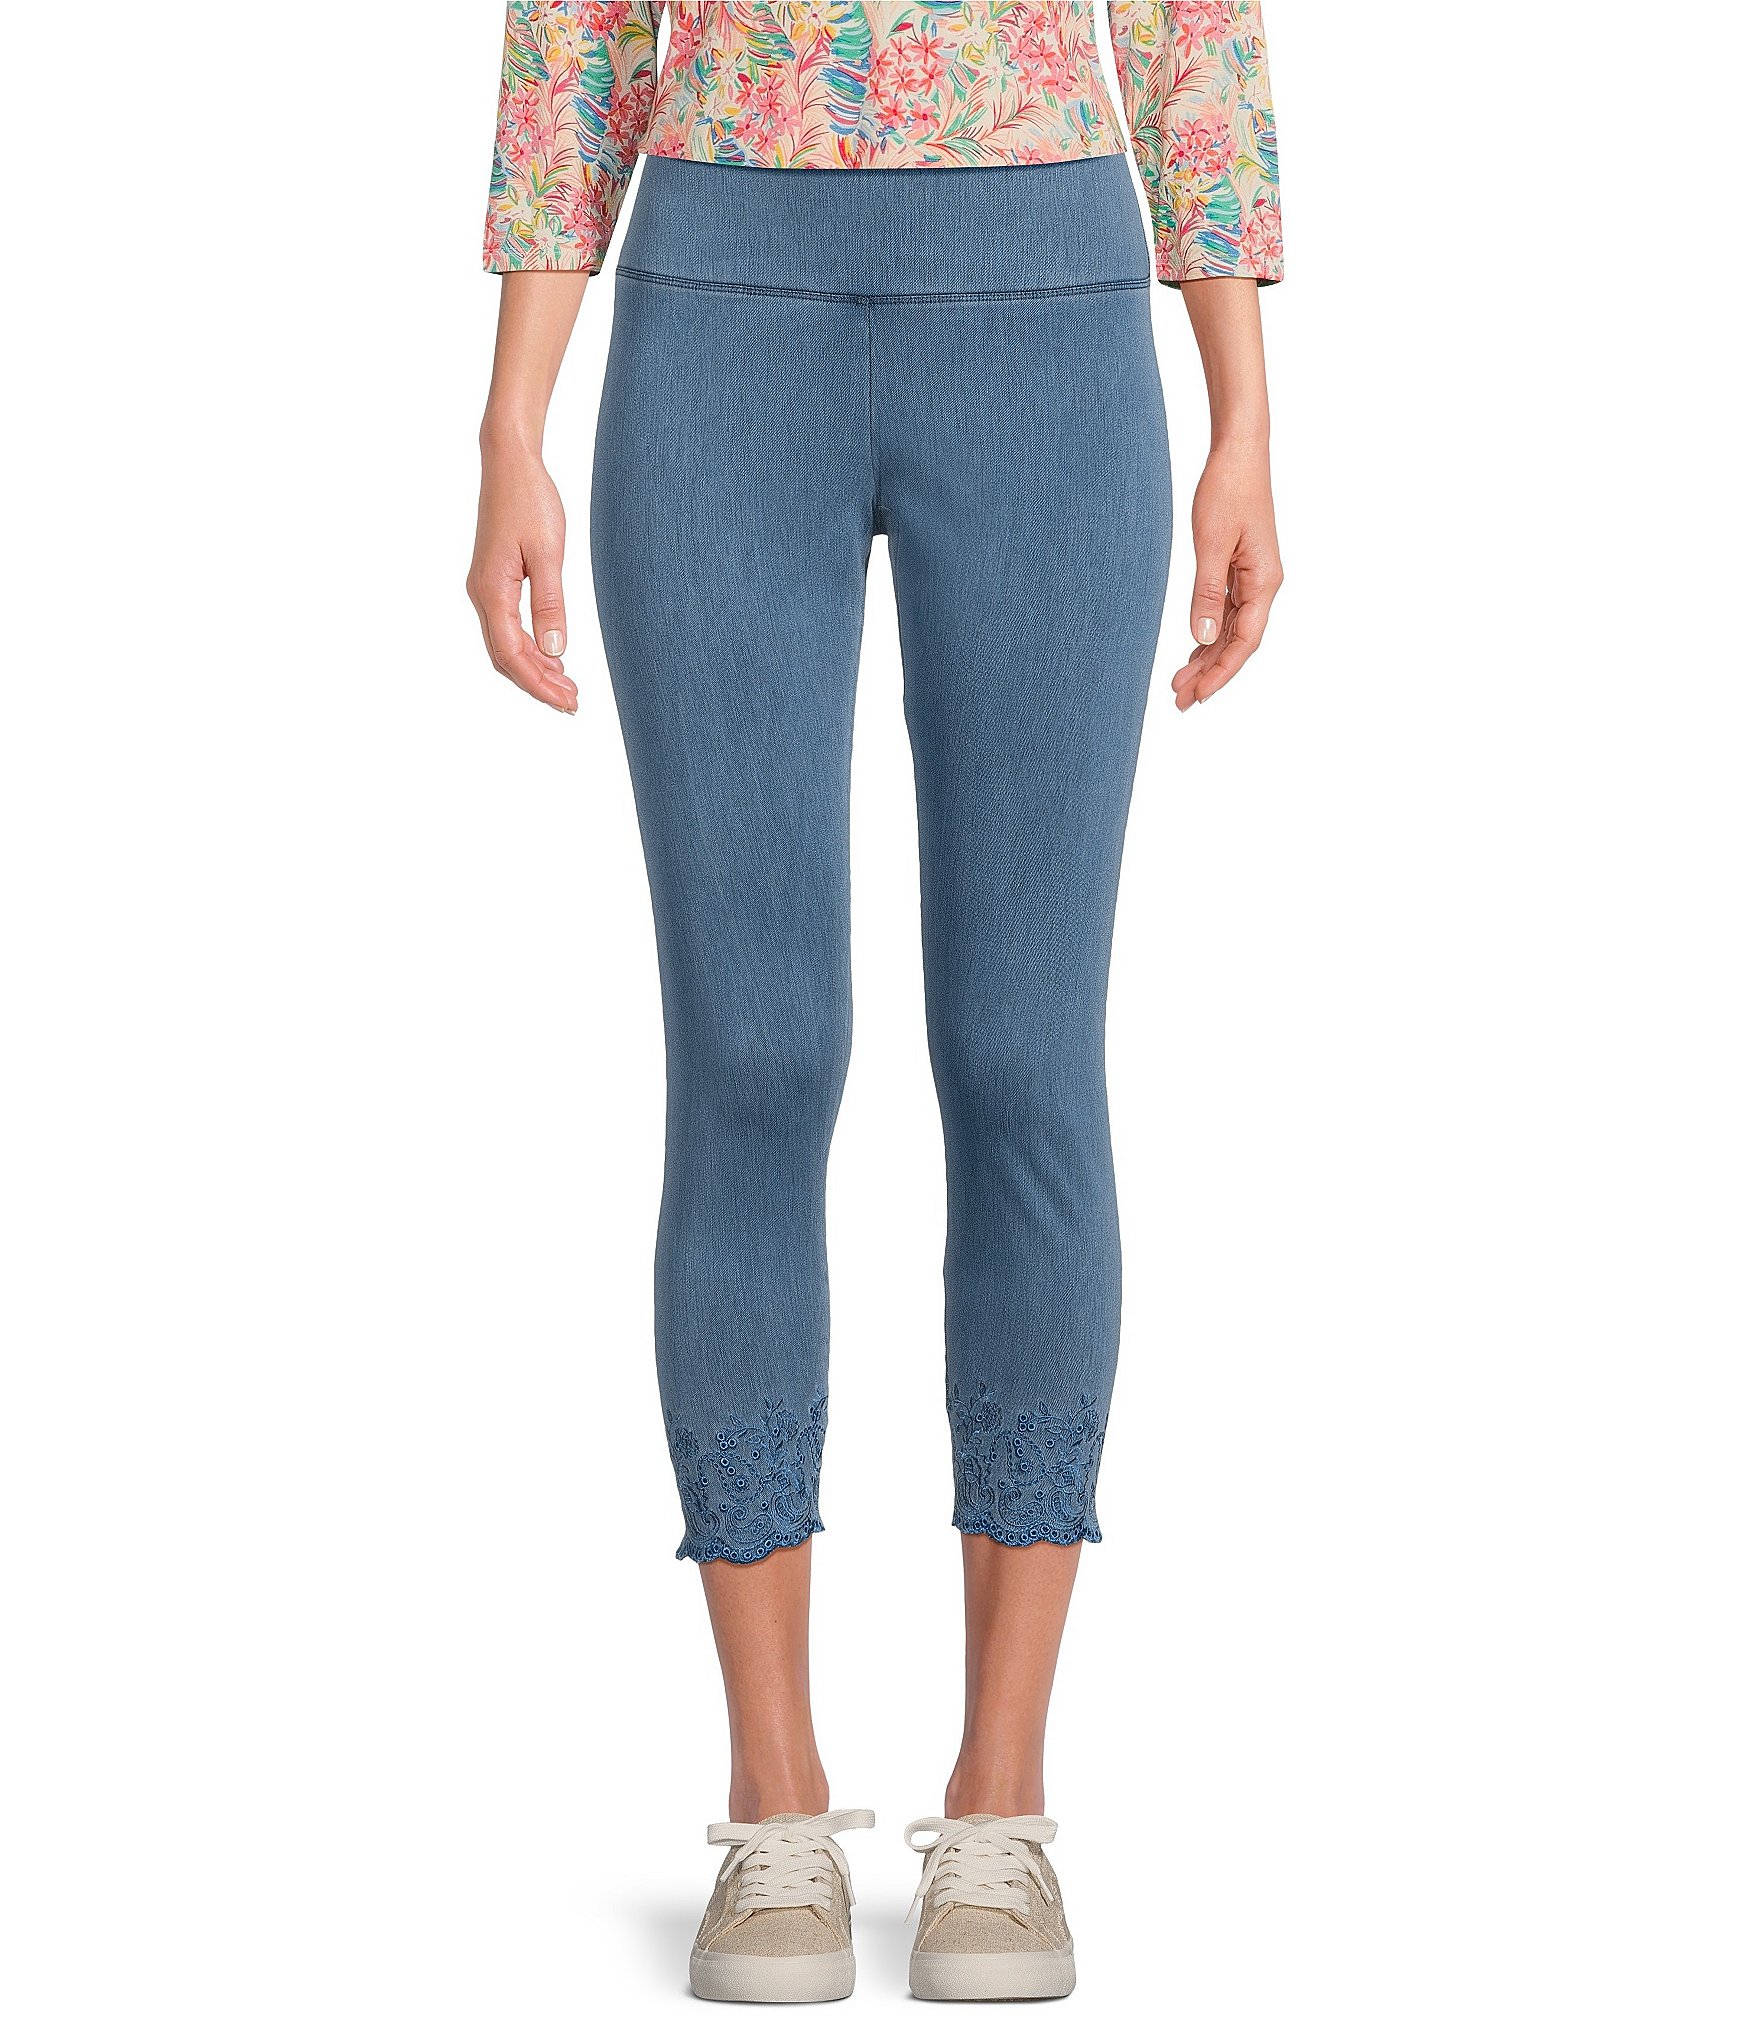 Intro Plus Size Love the Fit Pull-On Leggings | Dillard's